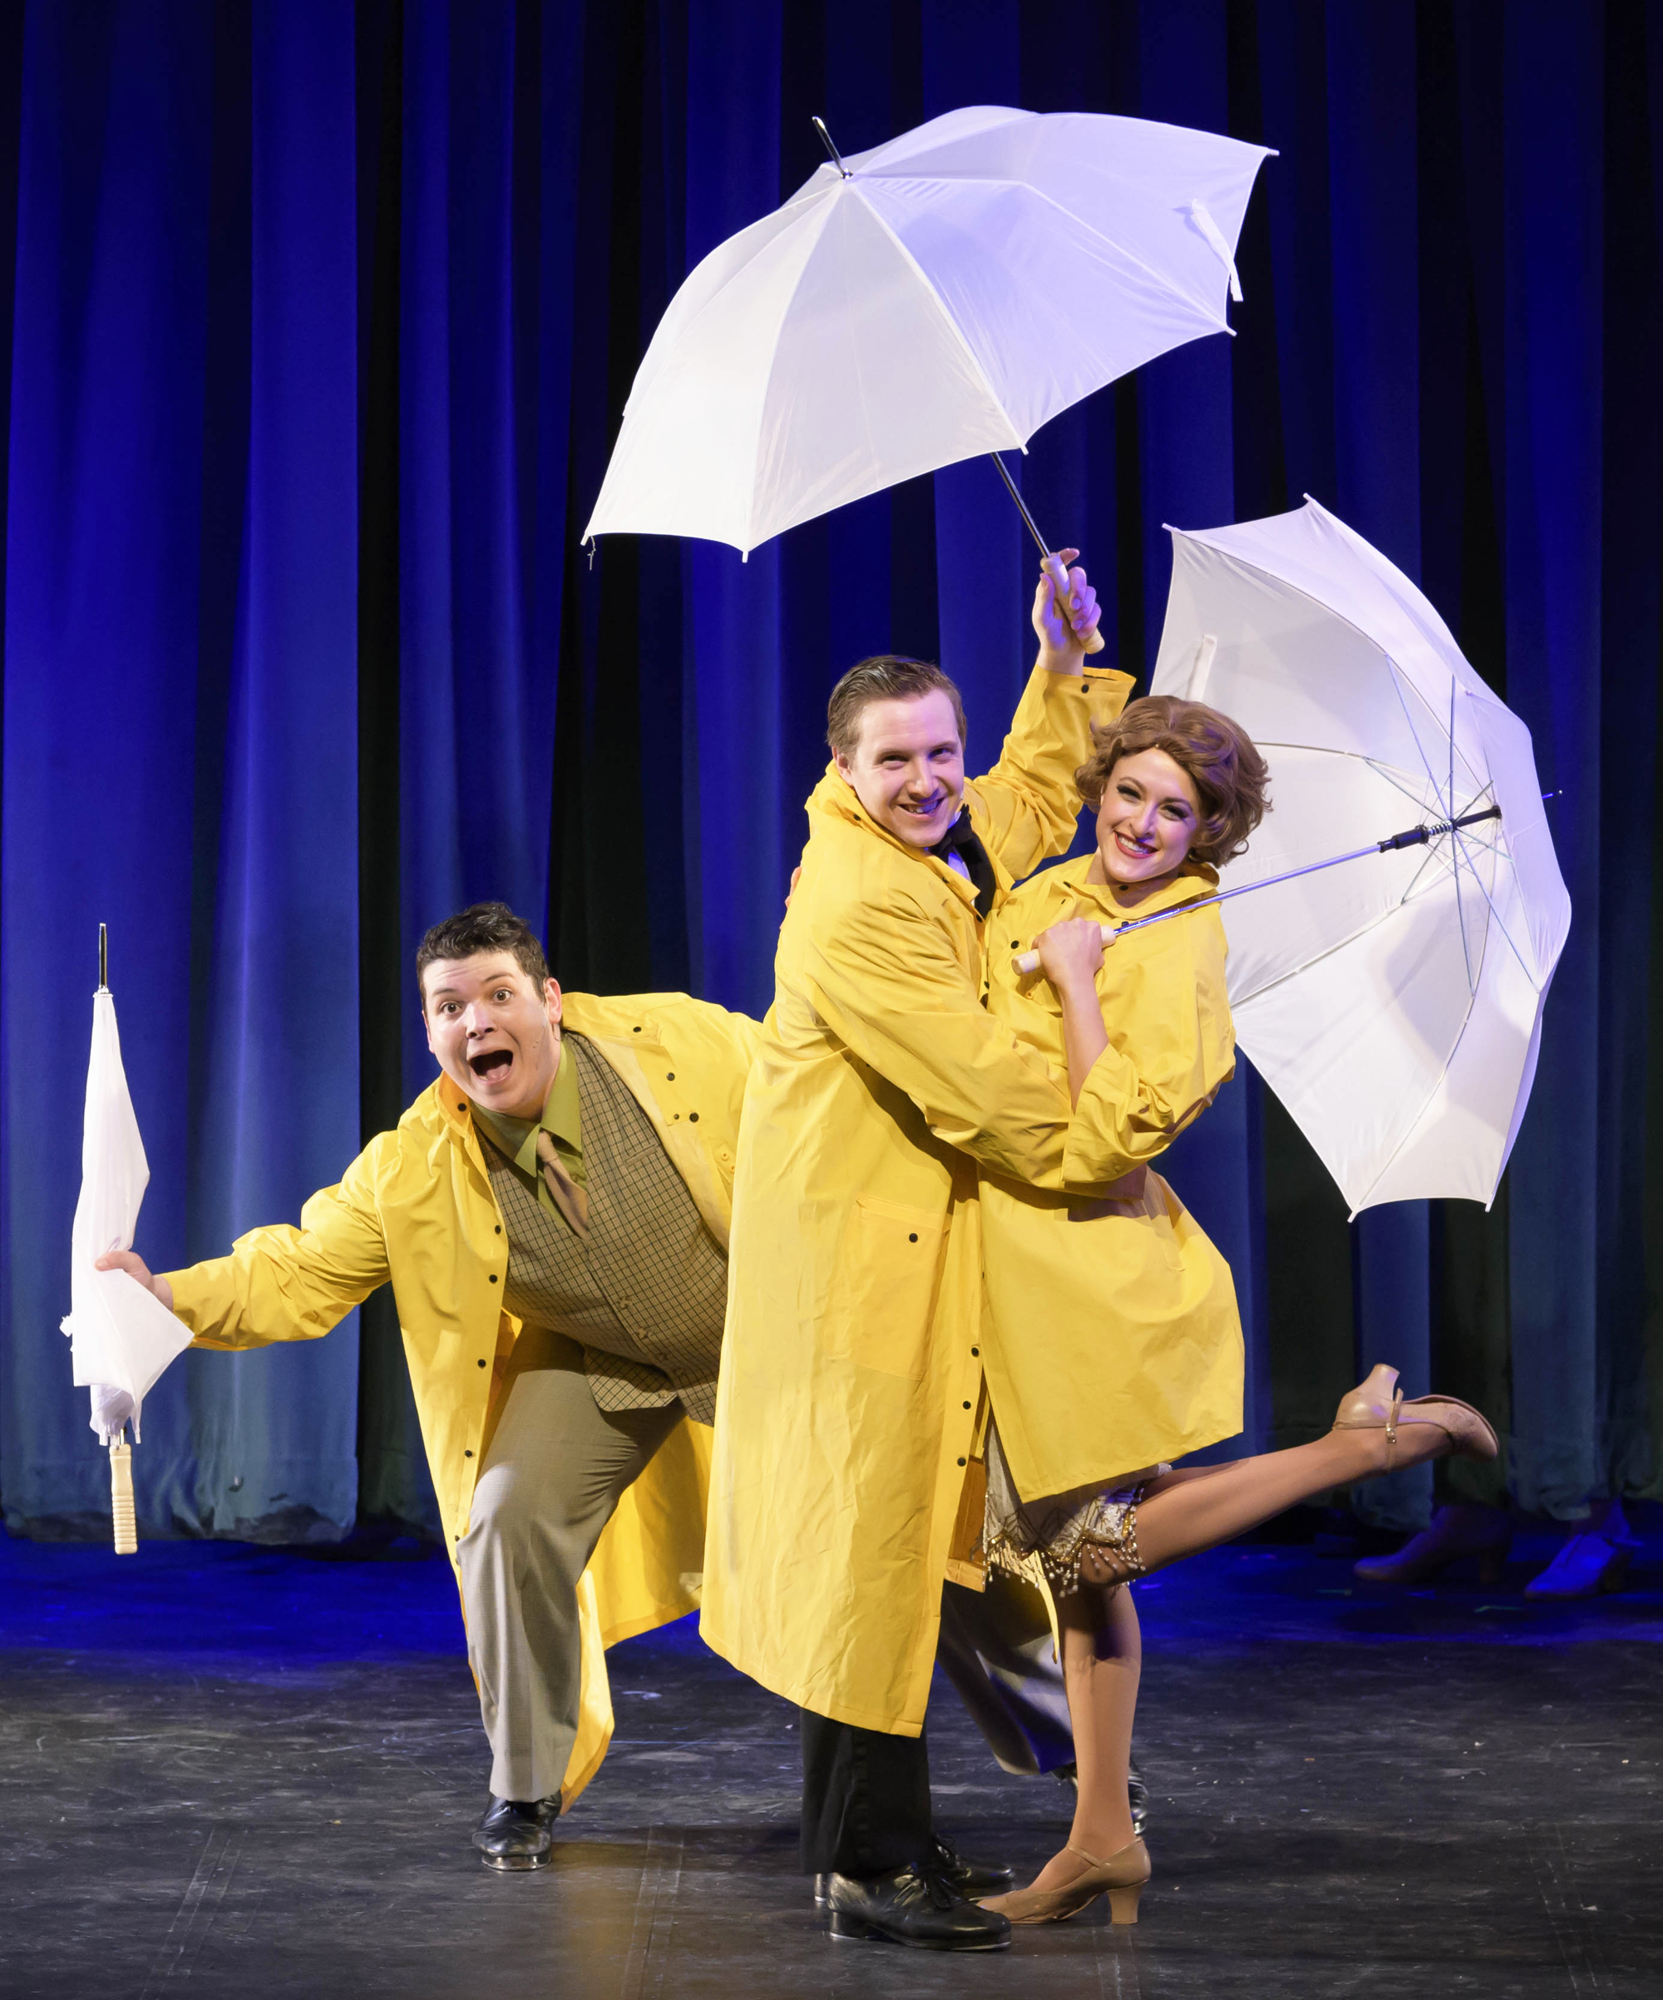 “Singin’ in the Rain” was choreographed by Brian Finnerty. Photo by Cliff Roles